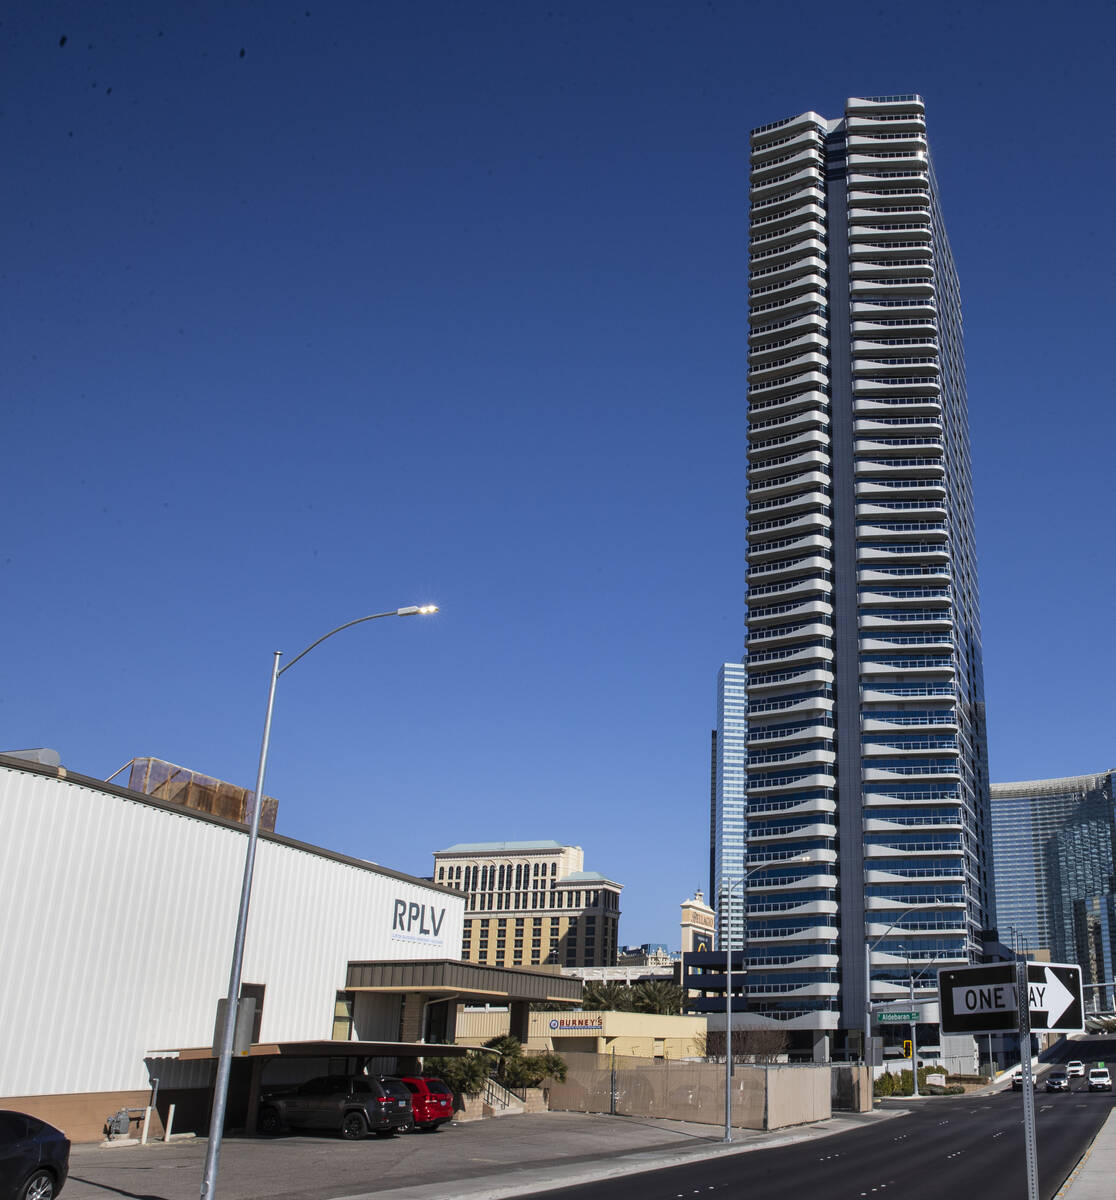 Royal Pacific of Las Vegas, left, a screen print/embroidery shop, and the Martin condo tower ar ...